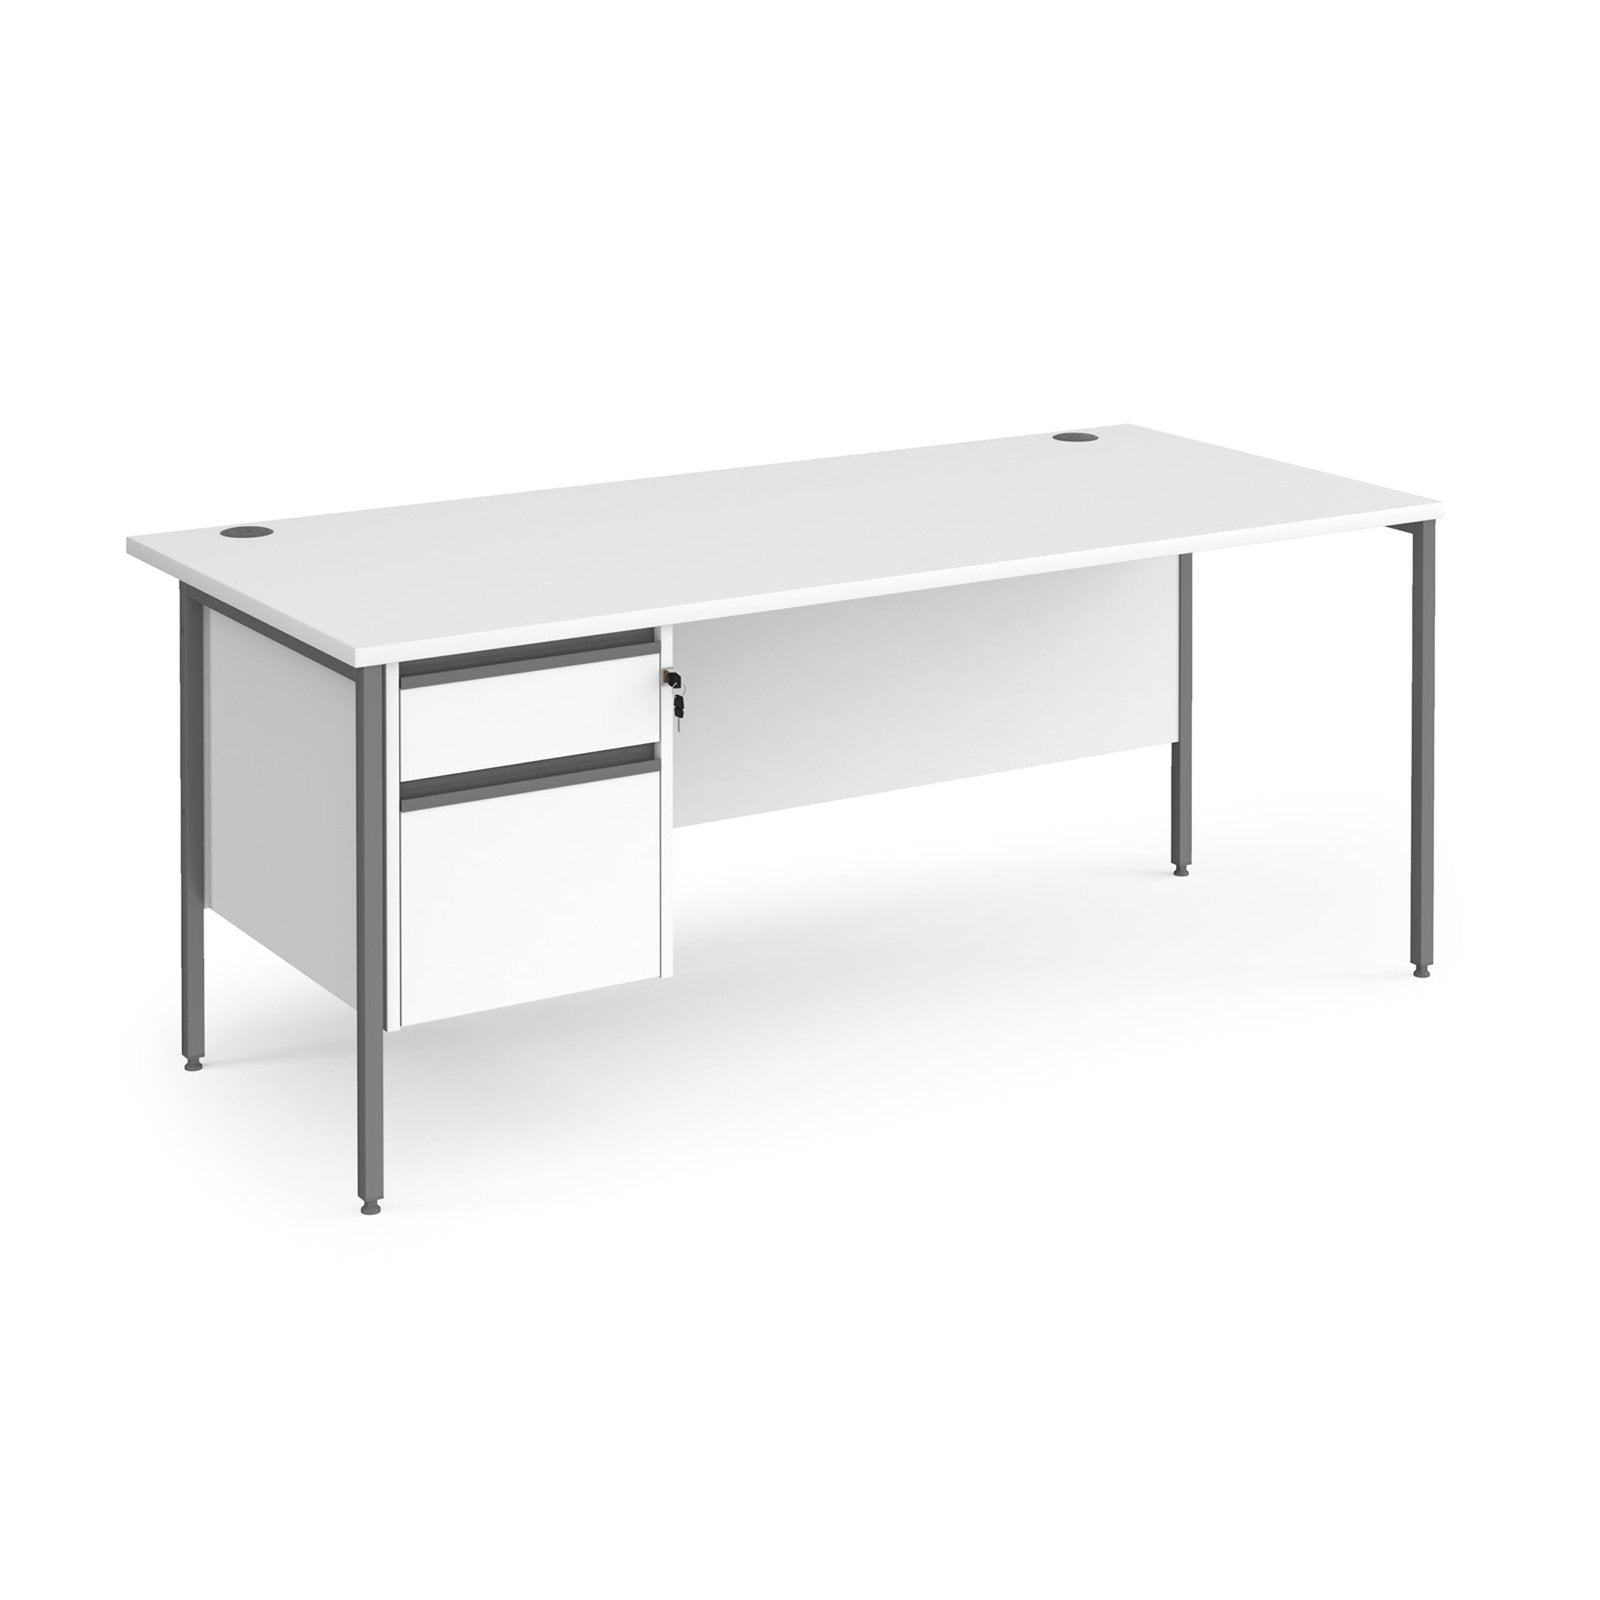 Contract 25 straight desk with 2 drawer pedestal and H-Frame leg - Office Products Online